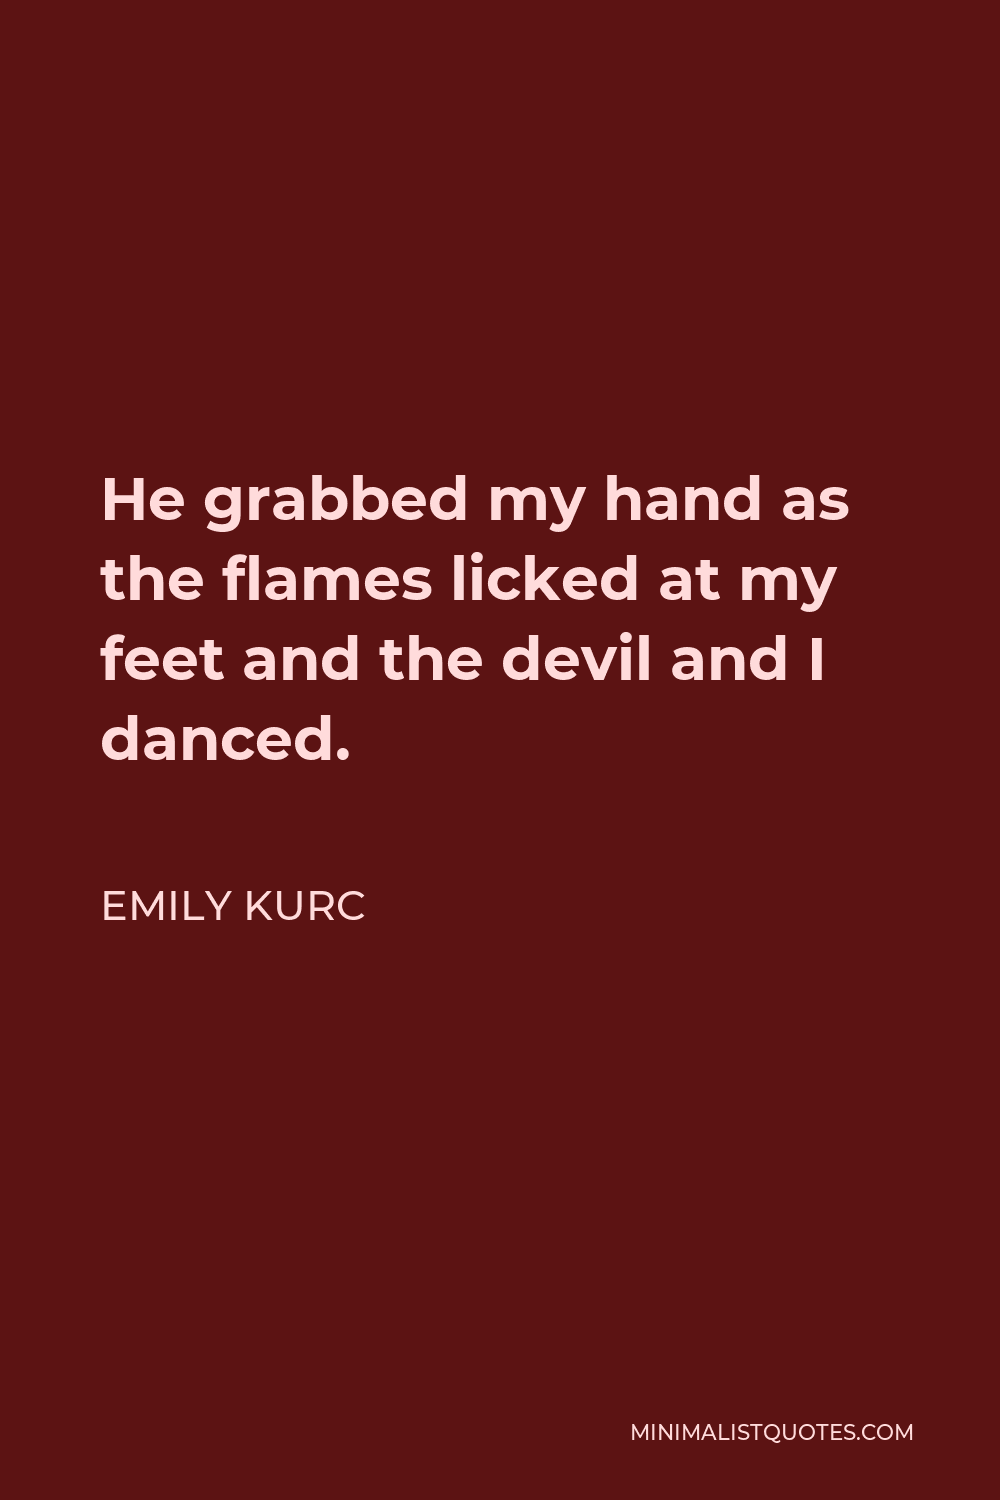 Emily Kurc Quote - He grabbed my hand as the flames licked at my feet and the devil and I danced.